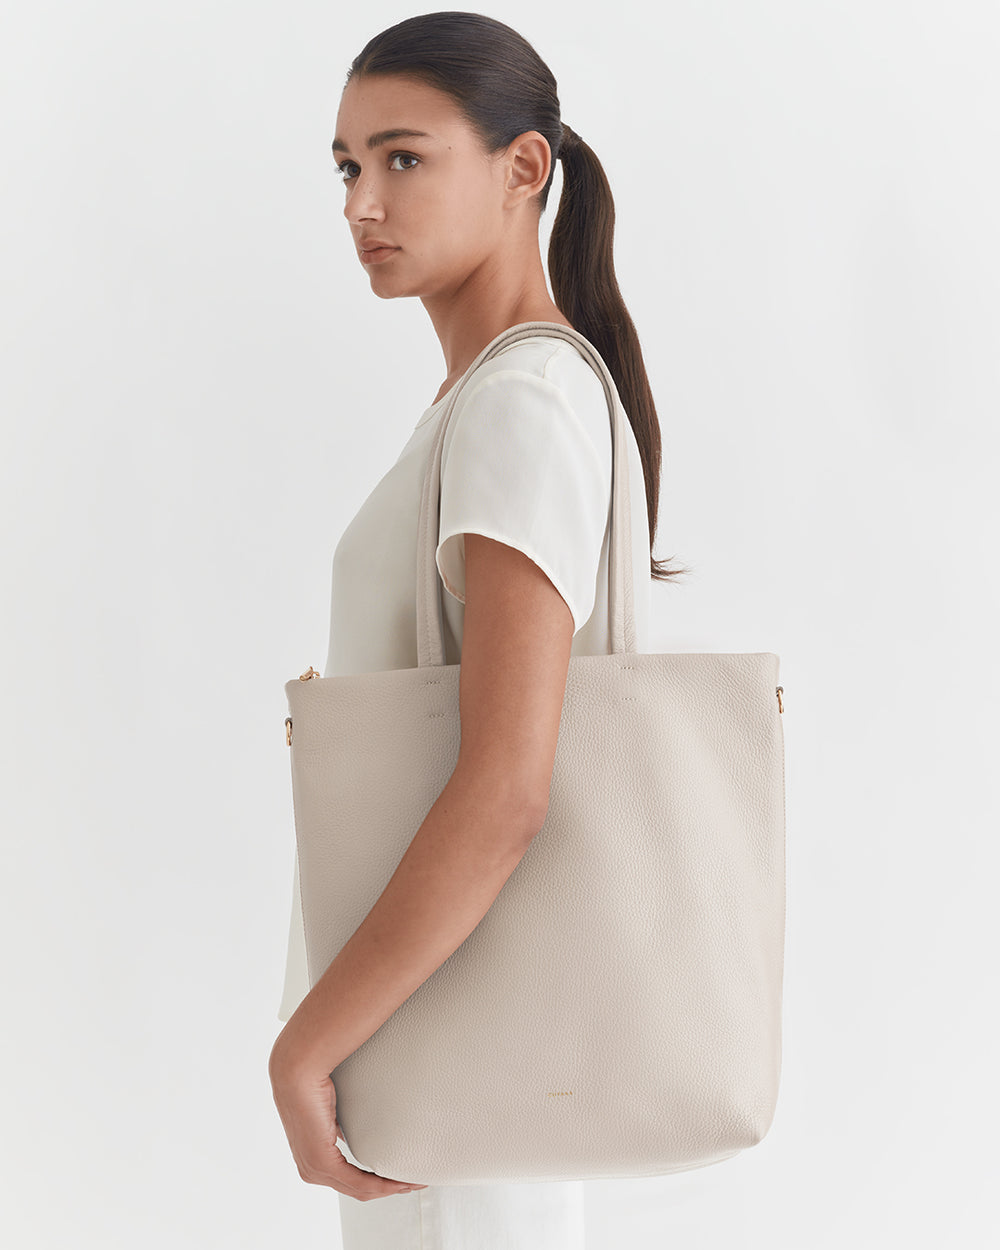 Woman standing sideways holding a large tote bag